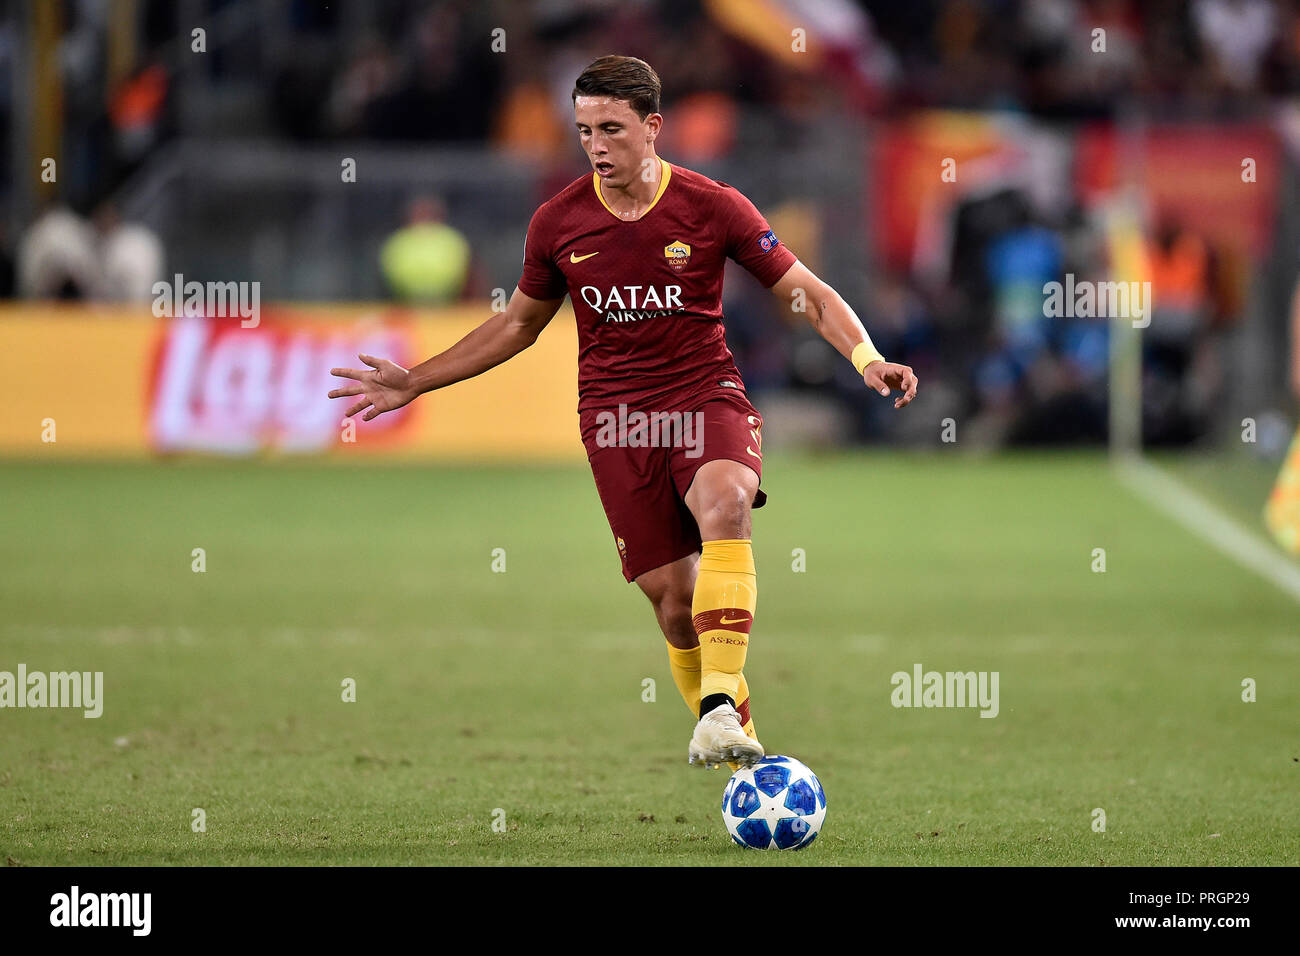 Luca Pellegrini of AS Roma during the UEFA Champions League group stage  match between Roma and FC Viktoria Plzen at Stadio Olimpico, Rome, Italy on  2 October 2018. Photo by Giuseppe Maffia.